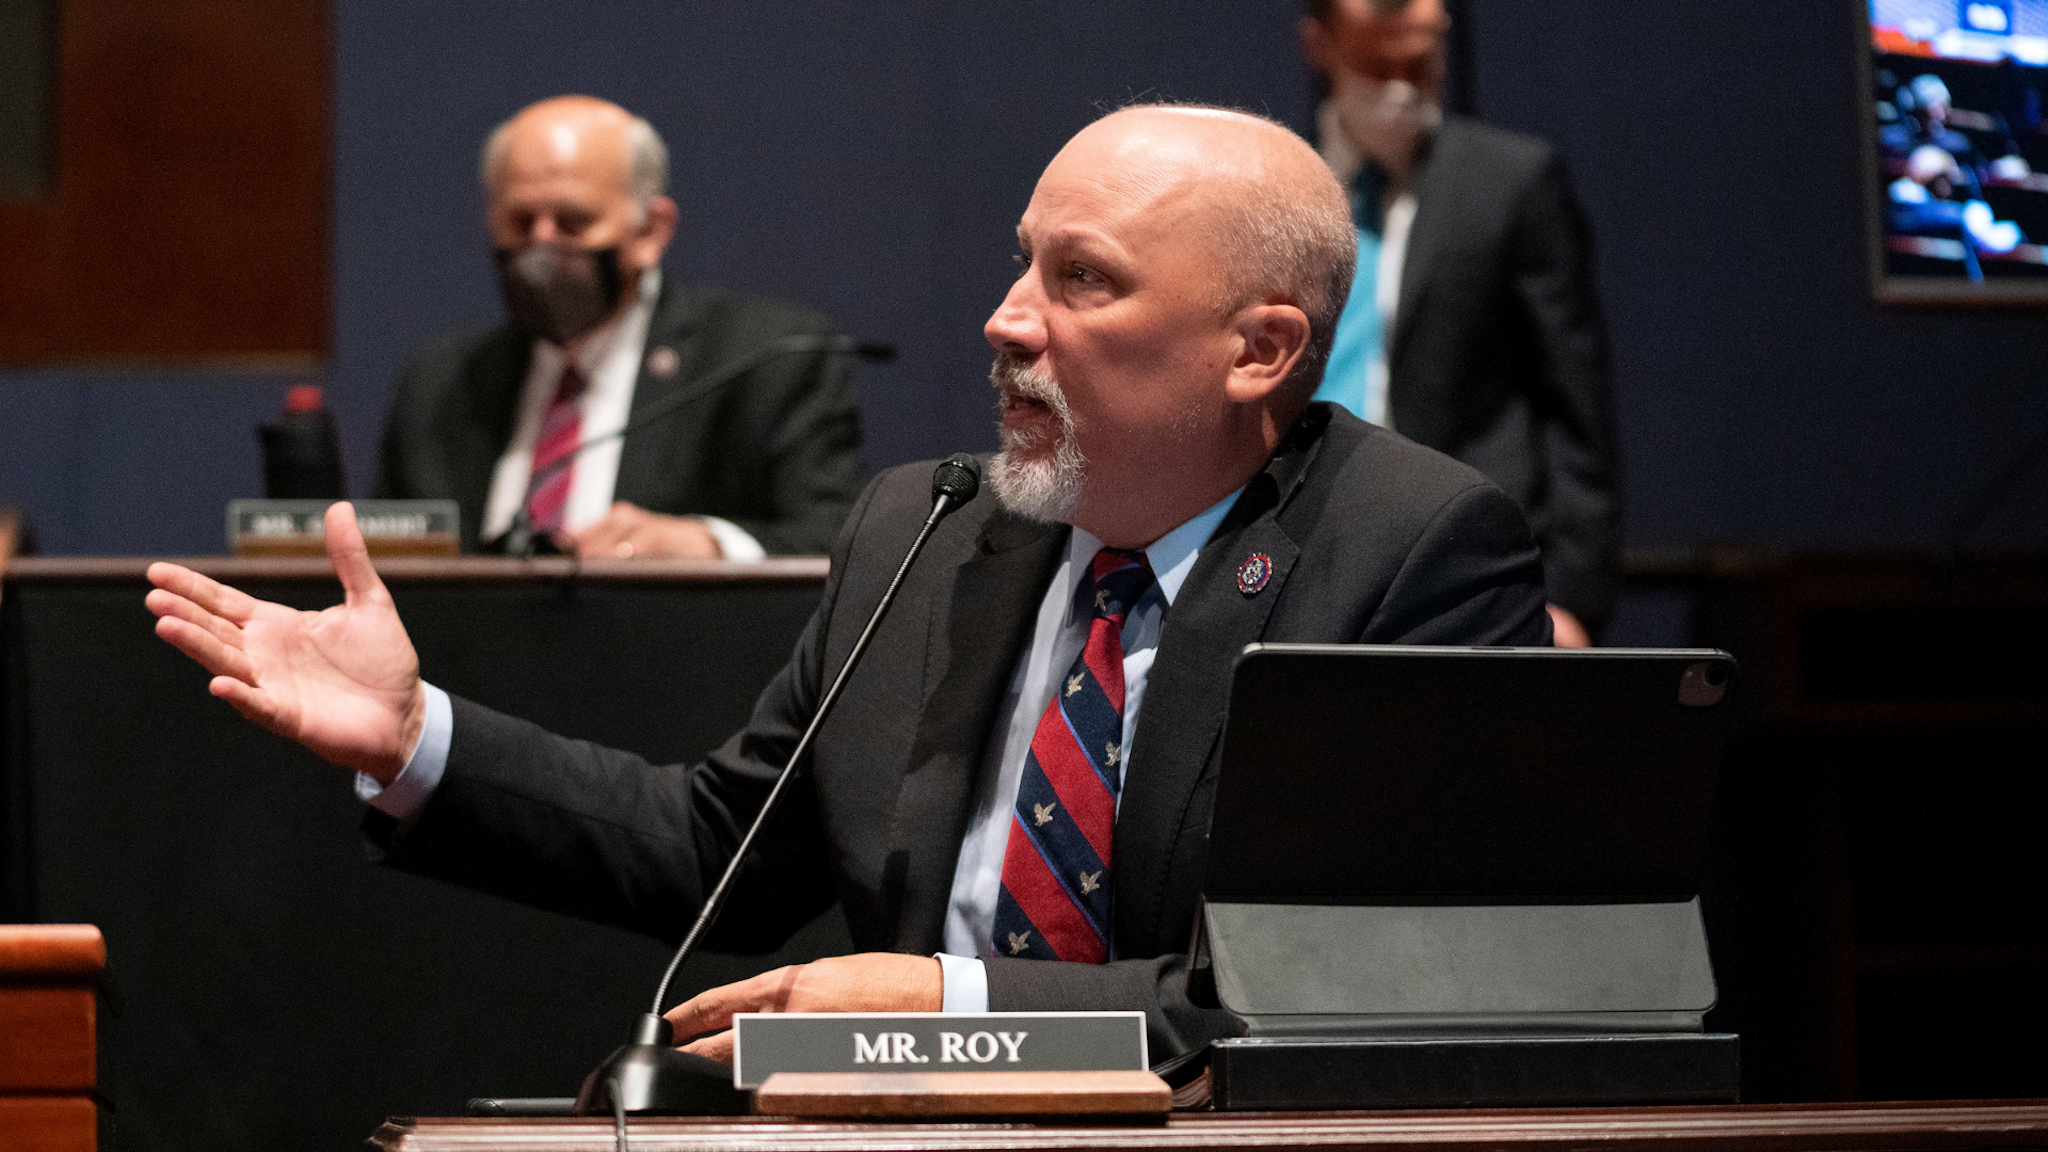 Representative Chip Roy, a Republican from Texas, speaks during a House Judiciary Committee hearing in Washington, D.C., U.S., on Thursday, Oct. 21, 2021.